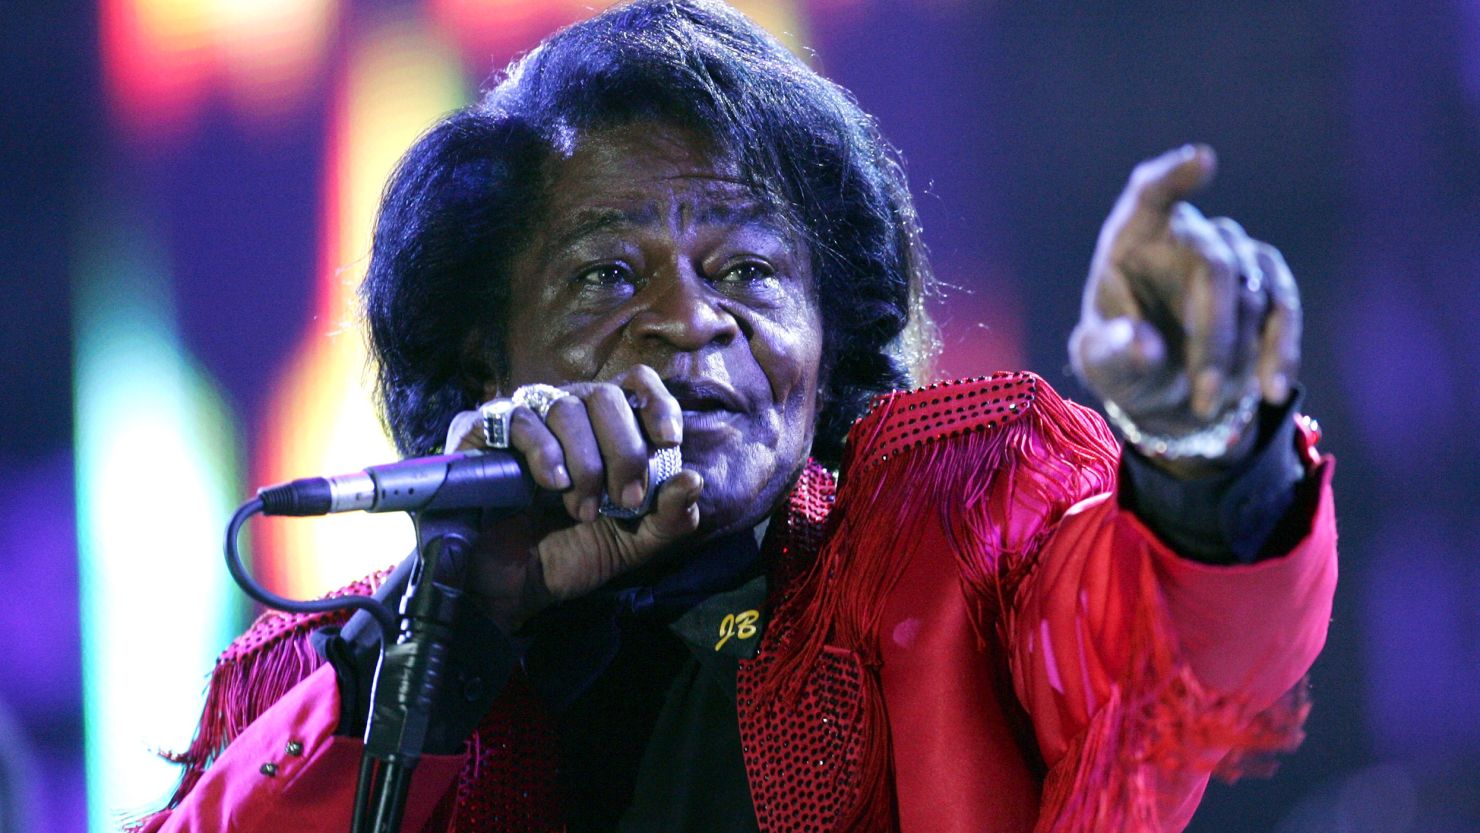 James Brown performs at the Live 8 Edinburgh concert on July 6, 2005, in Edinburgh, Scotland. The singer died the next year.